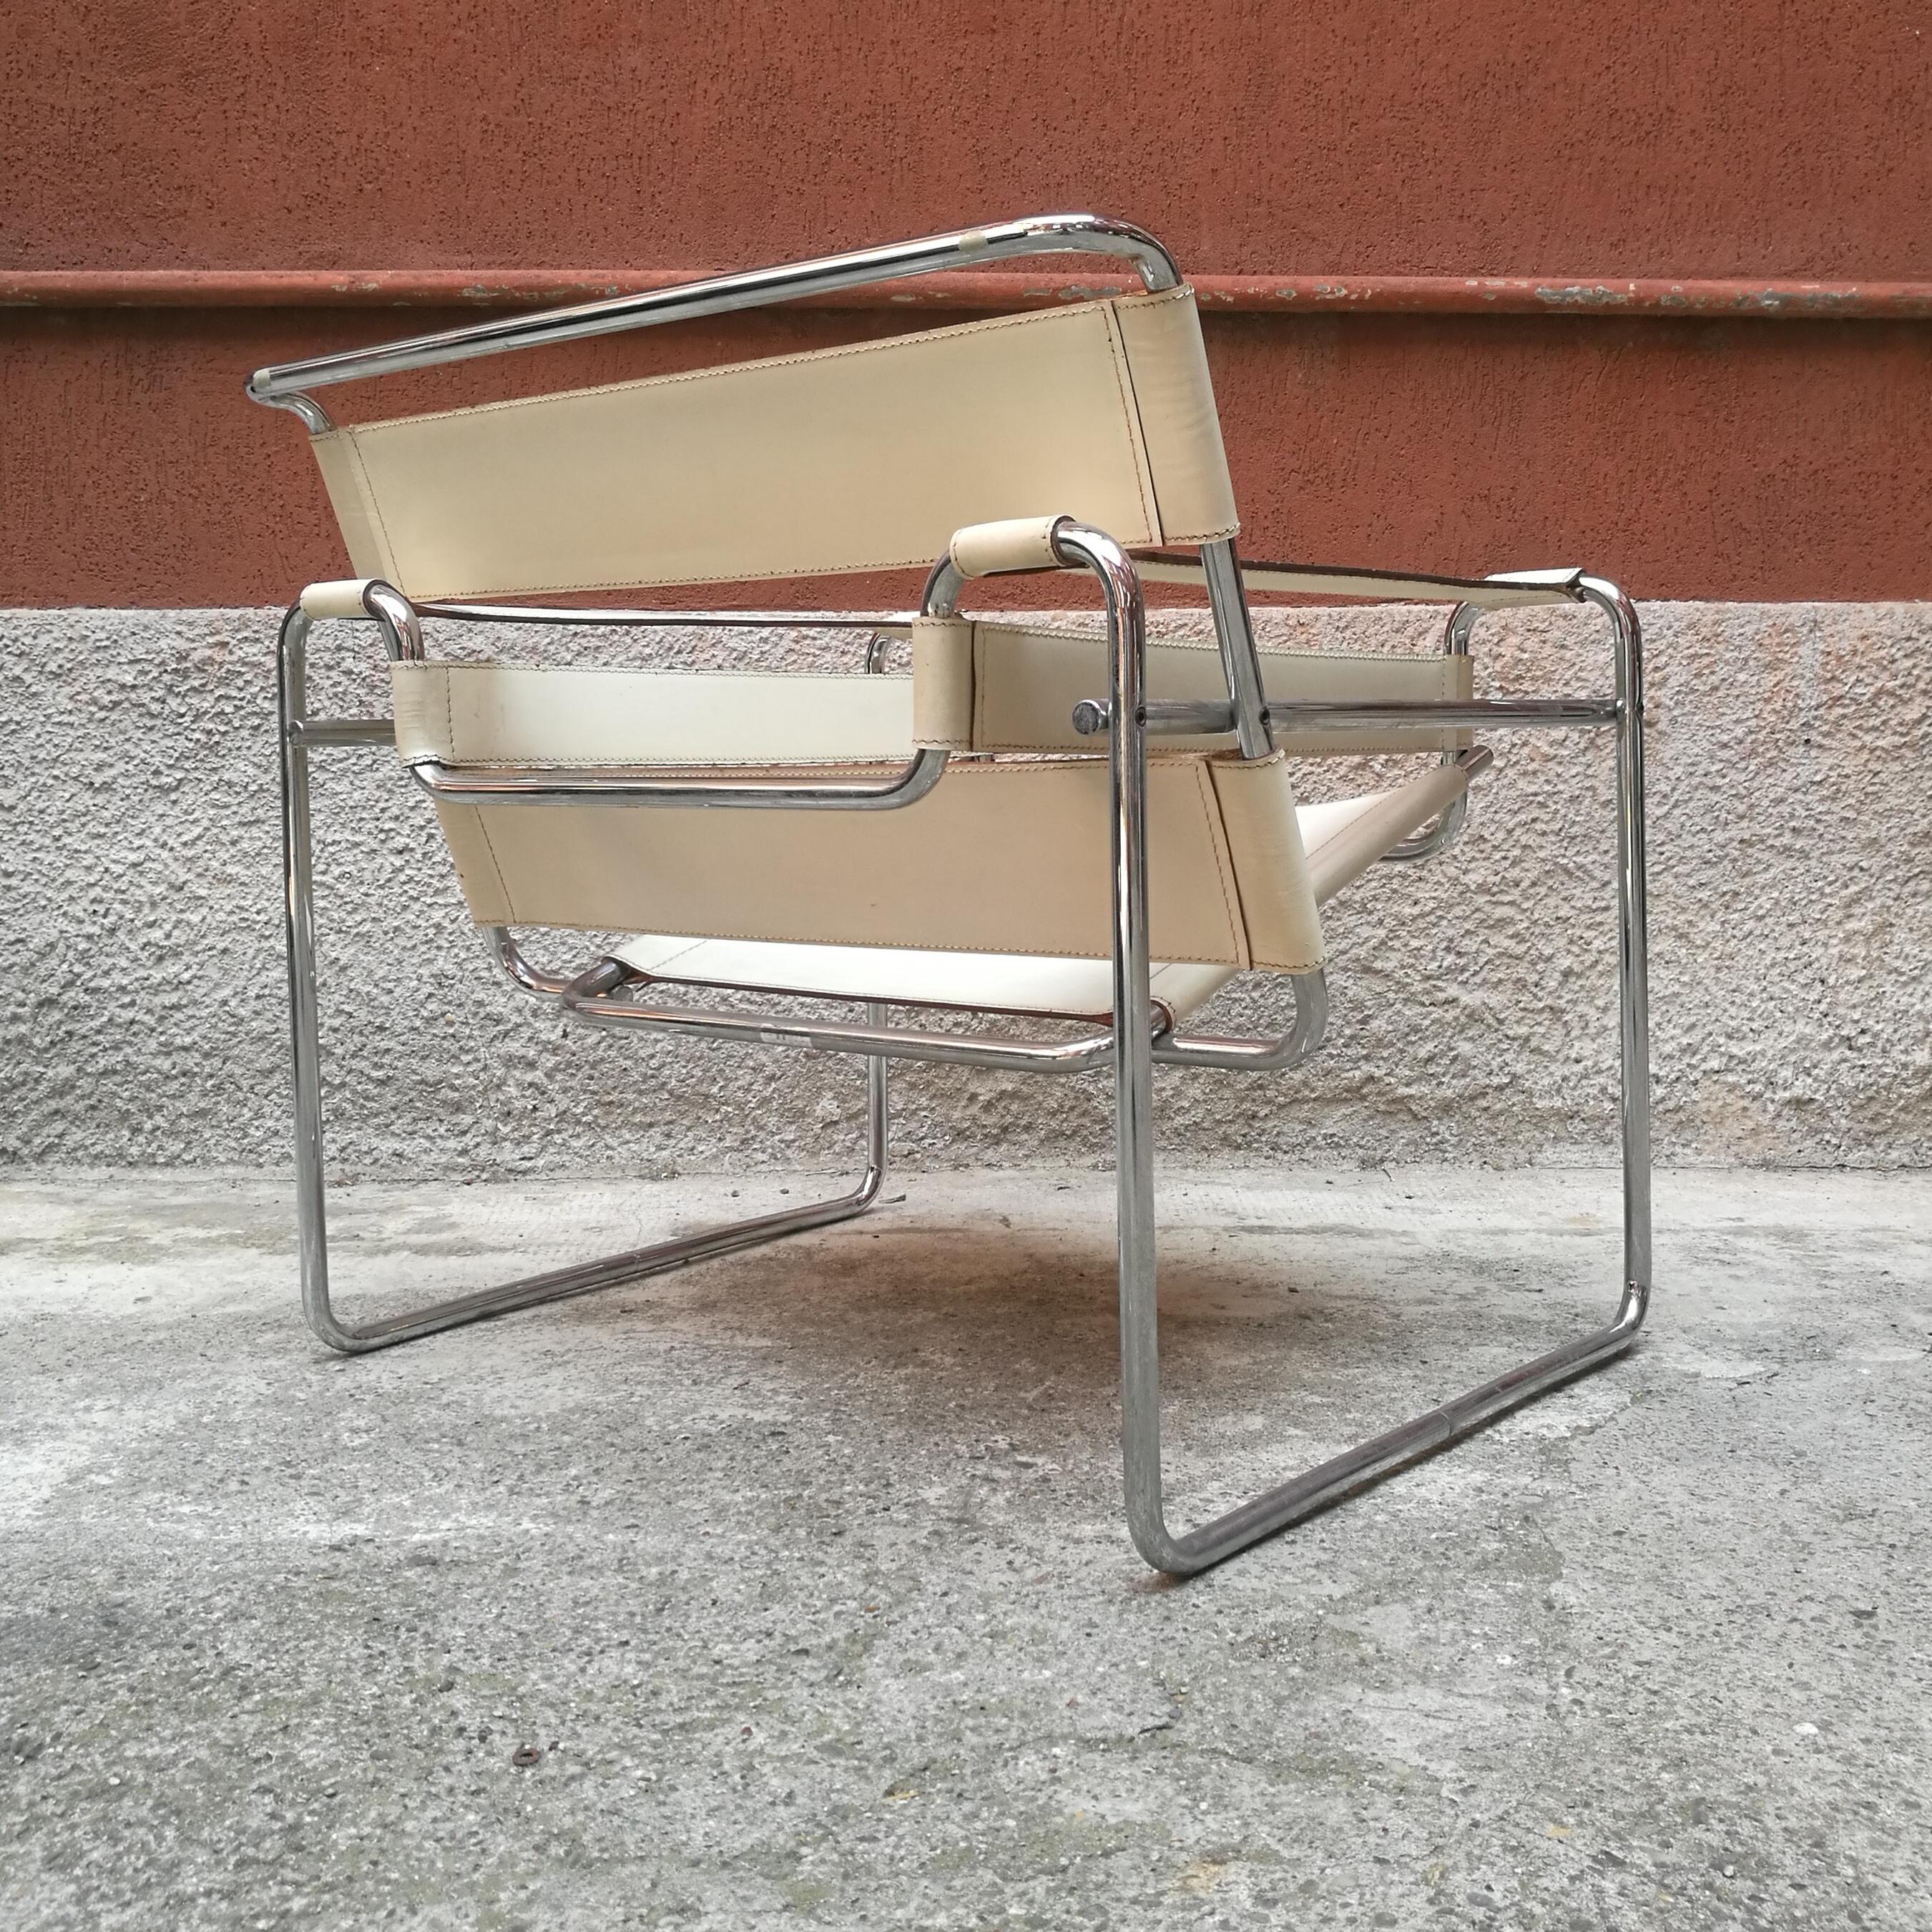 White leather Wassily armchair by Marcel Breuer for Gavina, 1968.
Mod.B3 armchair by Marcel Breuer, well known as Wassily, was designed in 1925. This superb white leather version comes from seventies, from a house of architects and sculptors set in